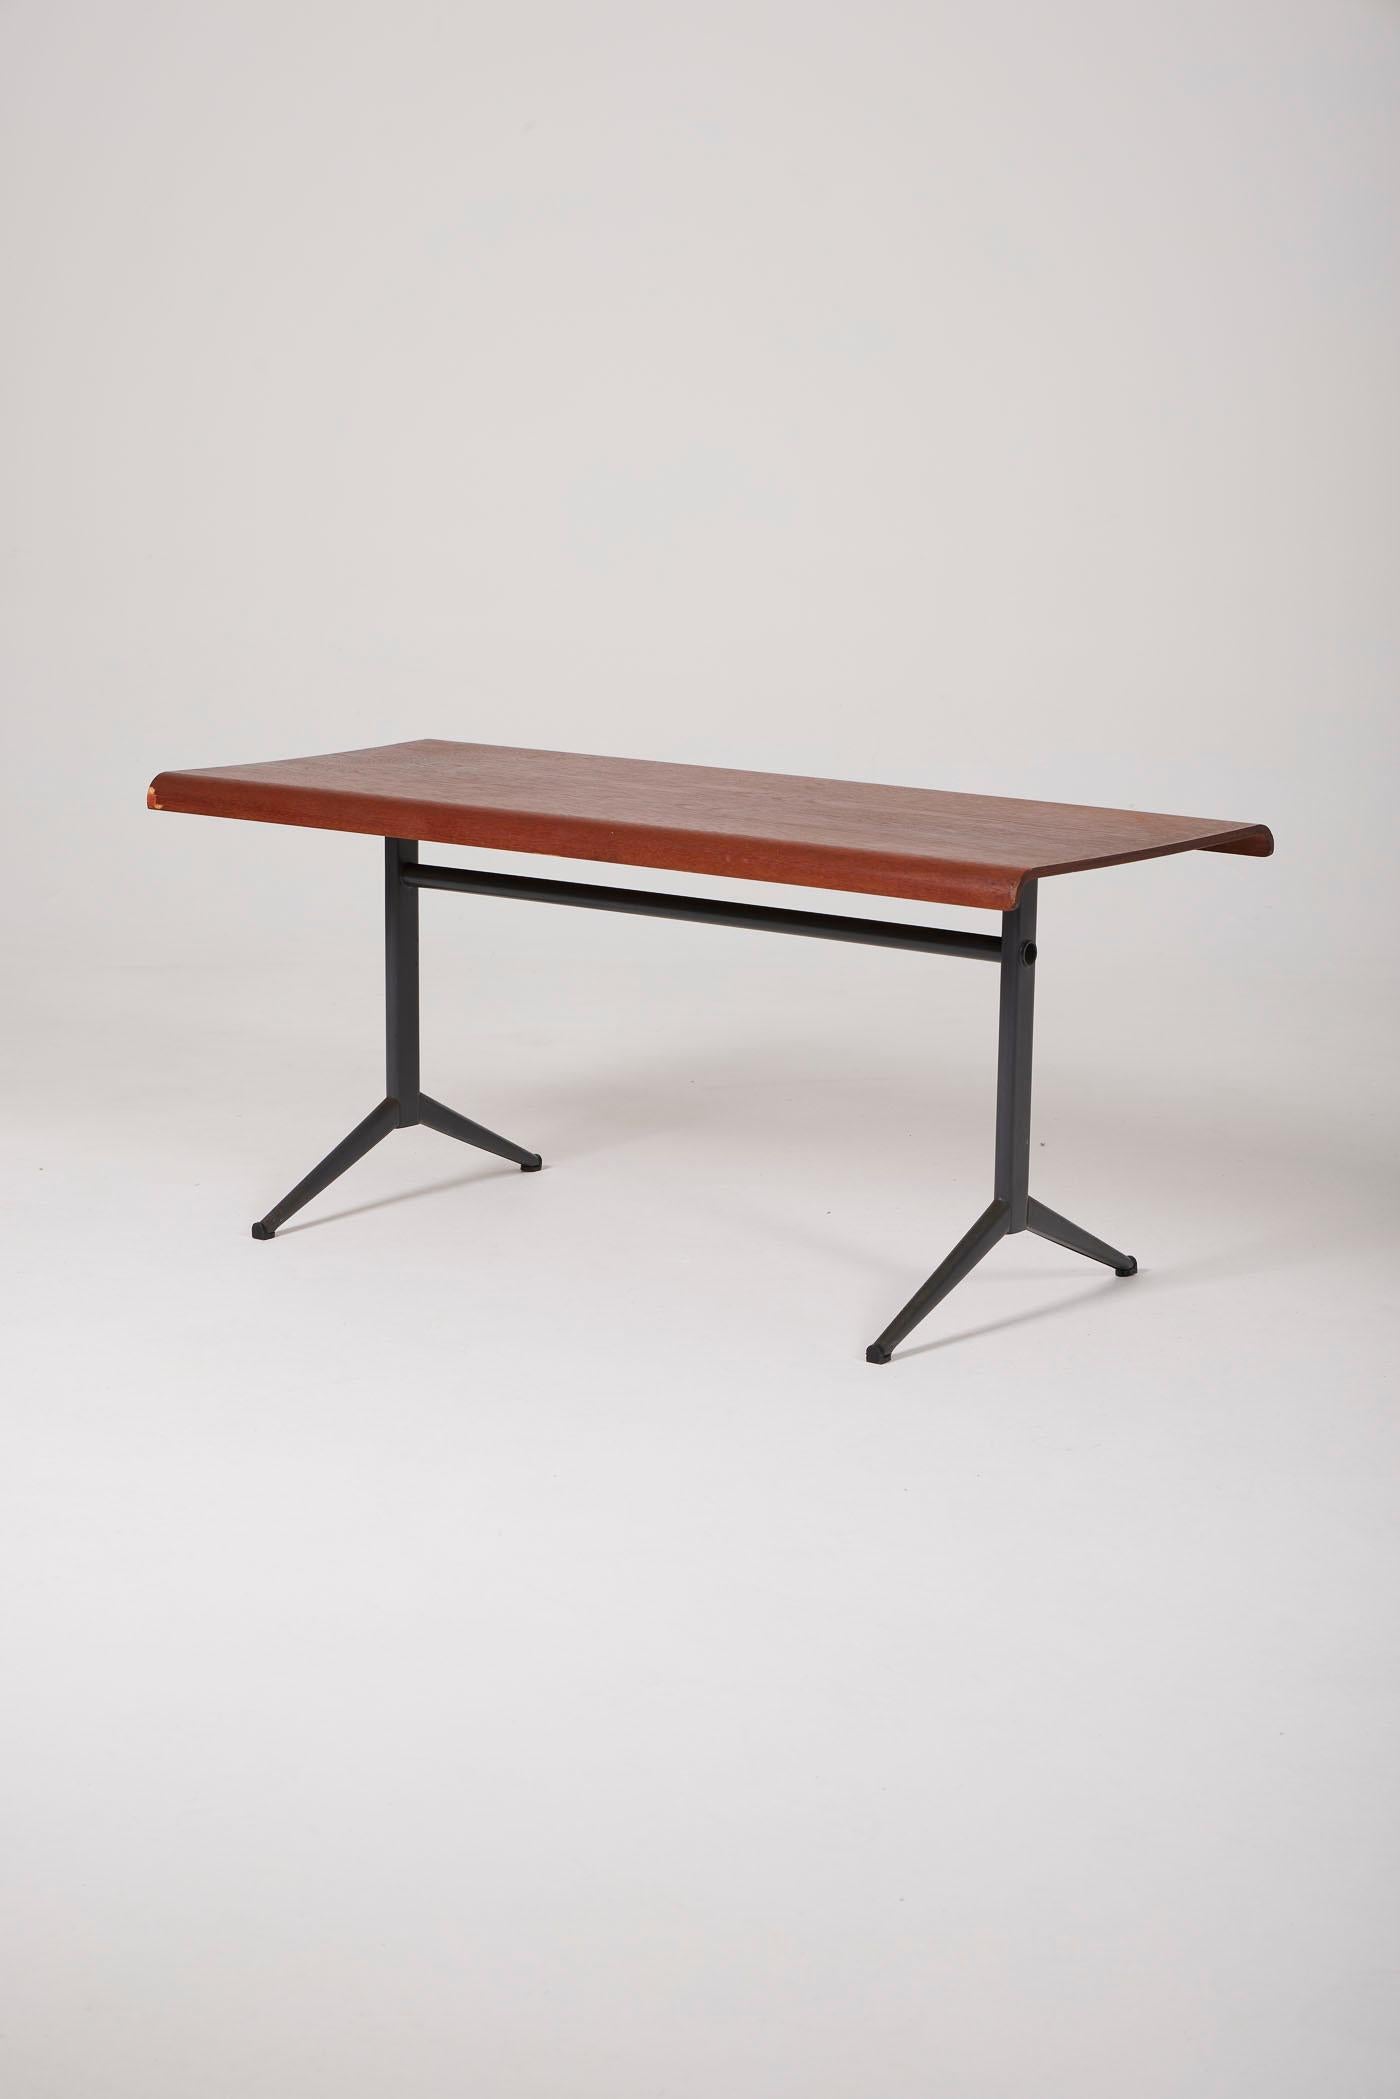 Coffee table by Dutch designer Friso Kramer for Auping, from the 1960s. It consists of a teak plywood tabletop and a black lacquered metal base. A lack of veneer is to be noted on two corners, visible in the photos.
DV426